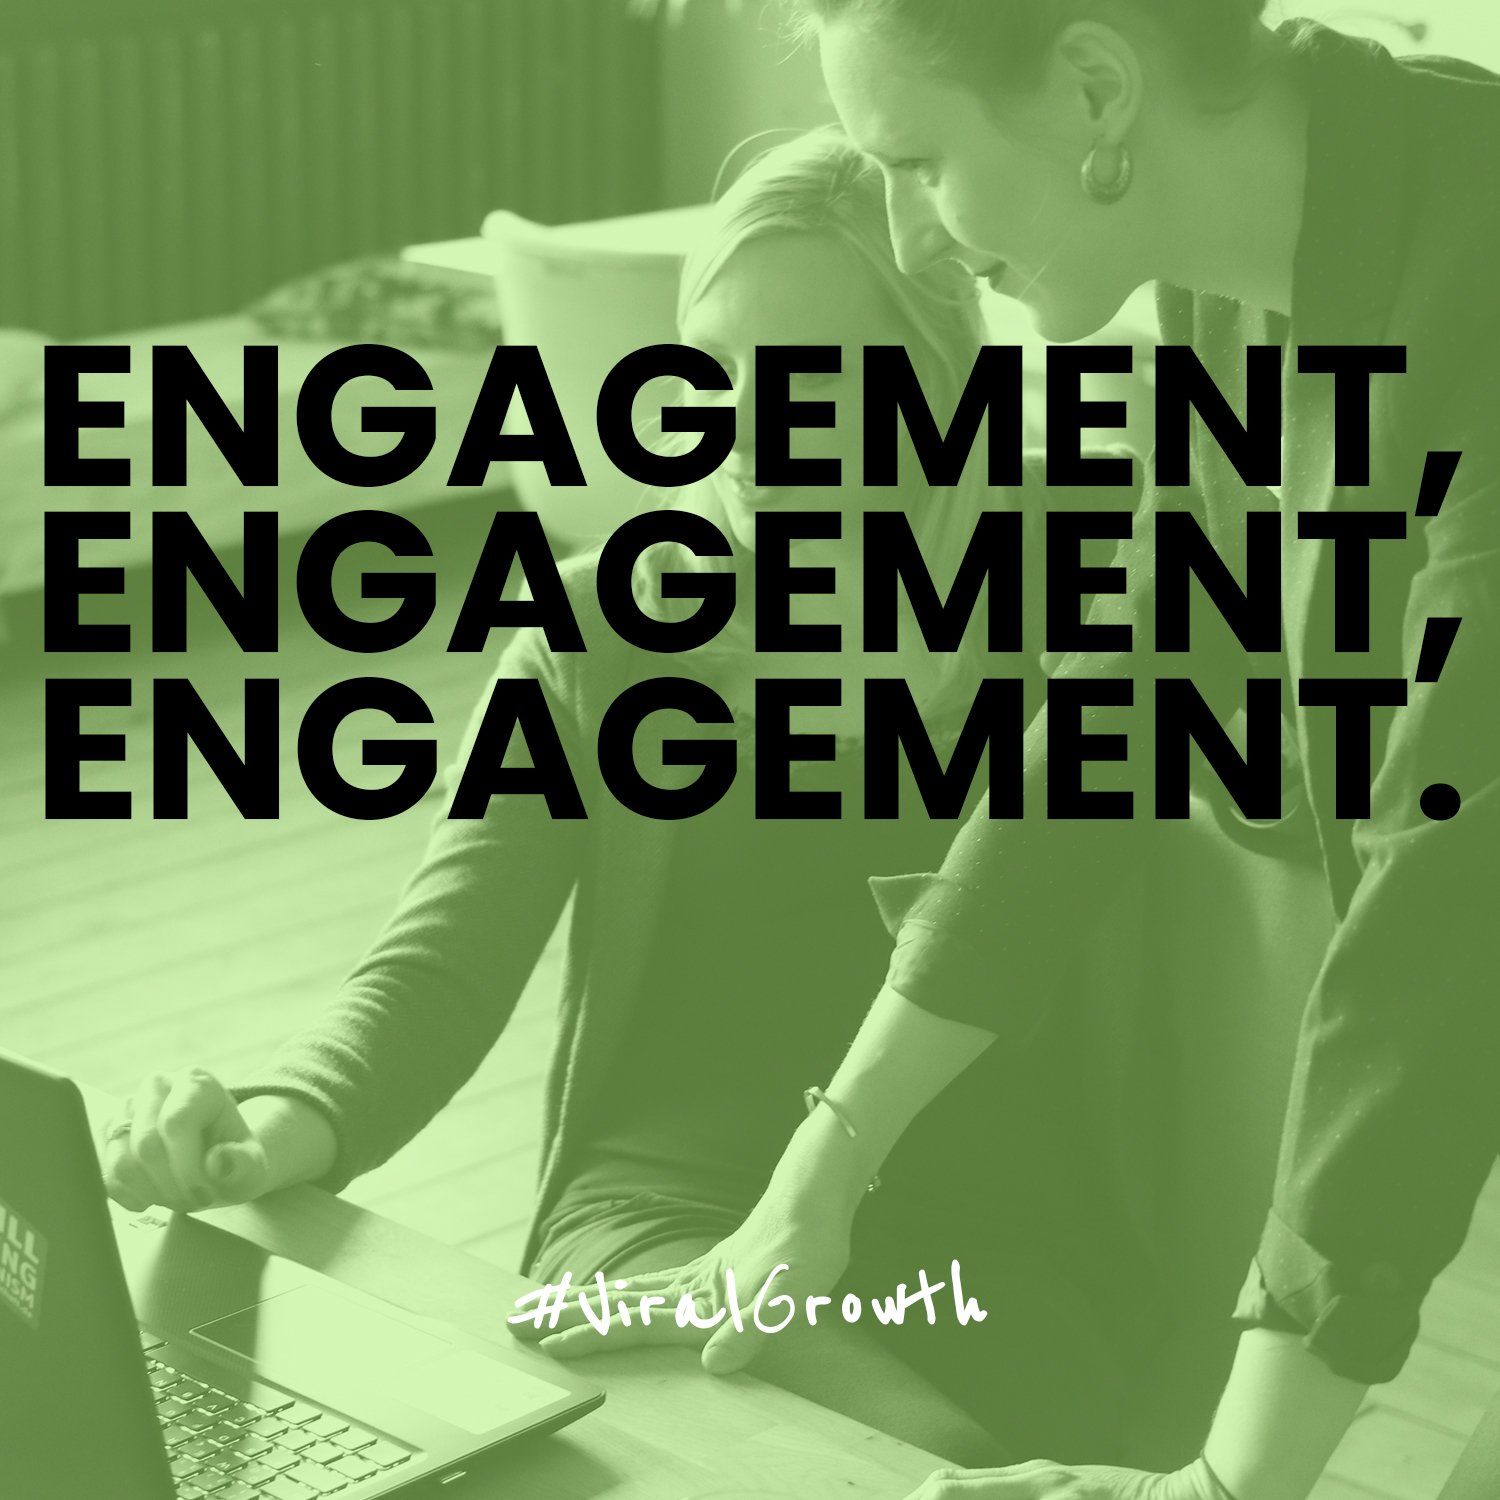 How to Increase Engagement blog image